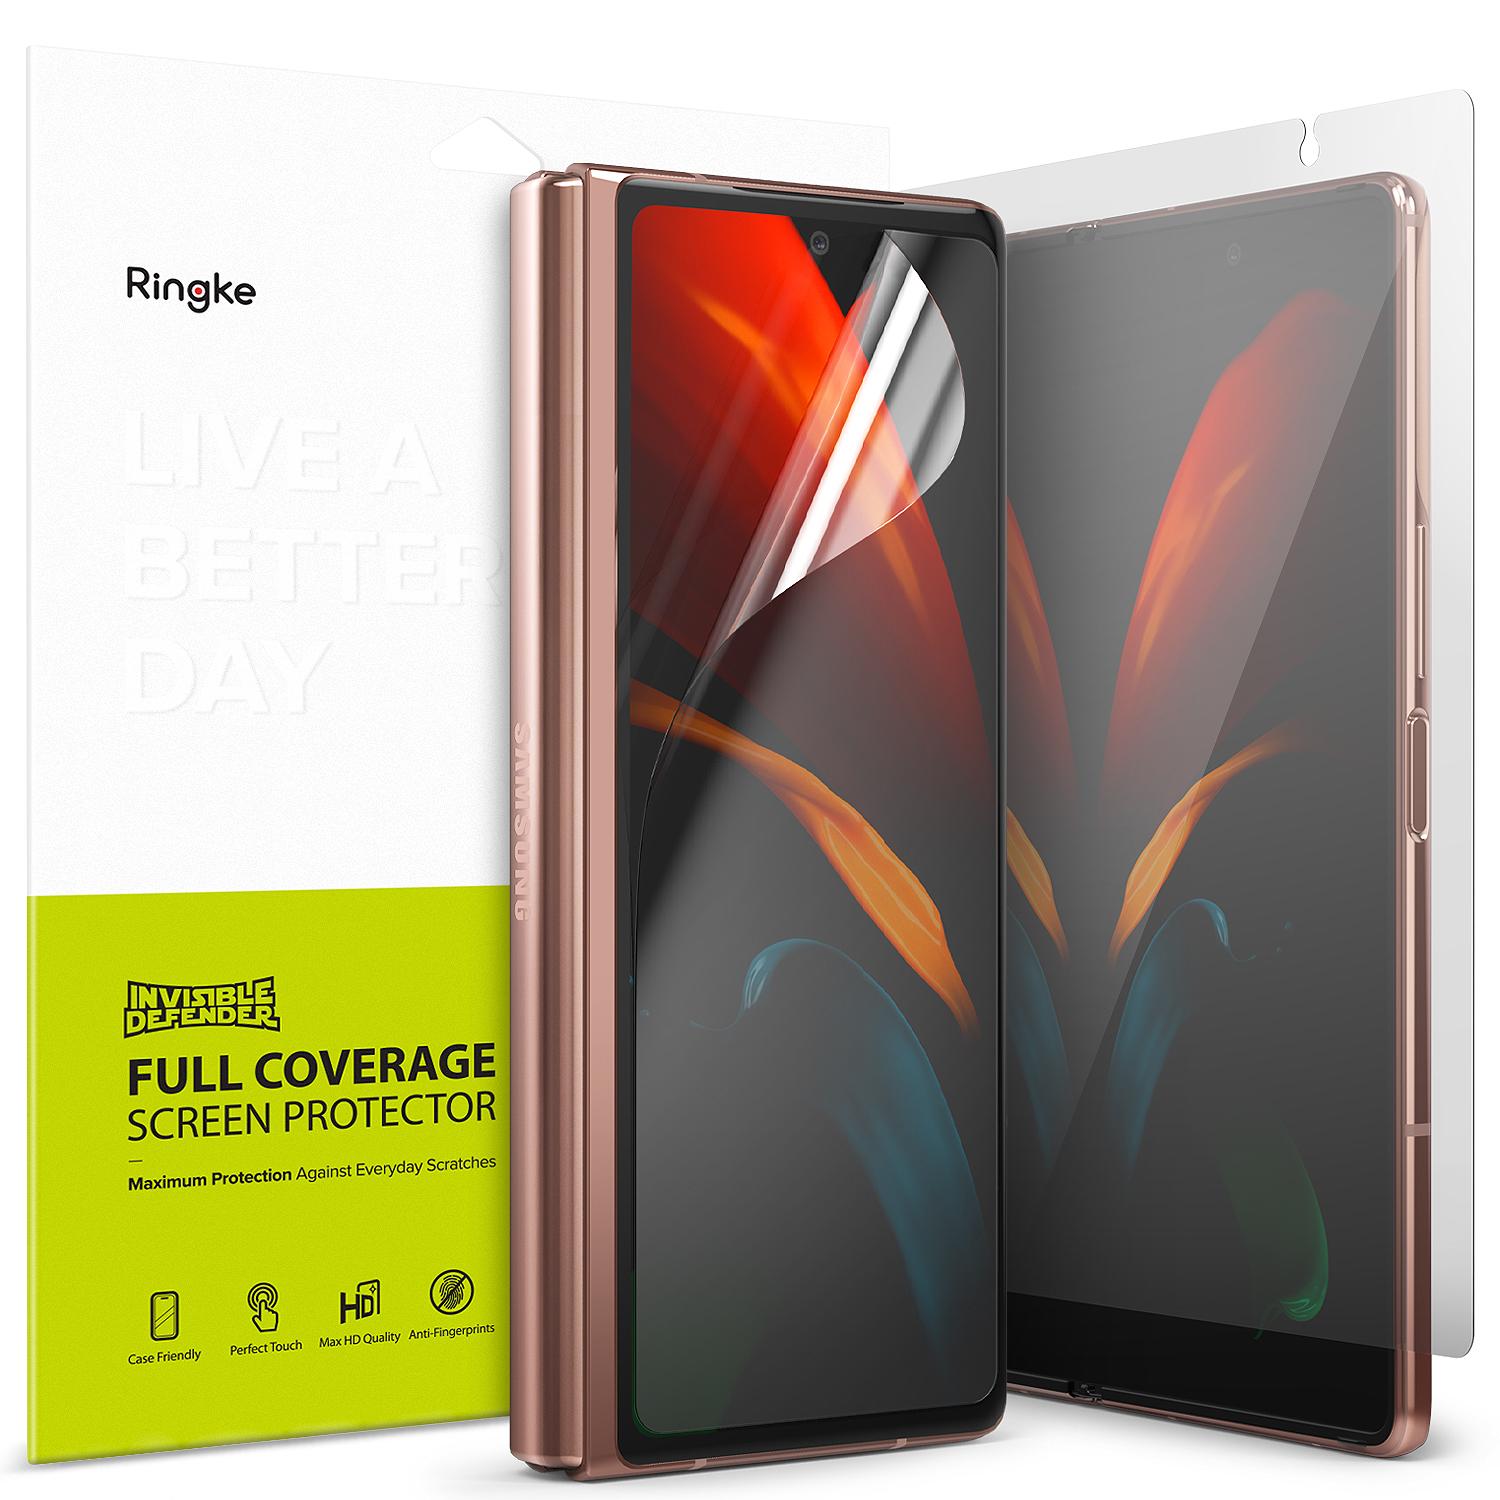 Ringke Invisible Defender Full Coverage (2 Pack) Compatible Screen Guard for Samsung Galaxy Z Fold 2 (2020) Screen Protector [Touch Tech Technology] [ Crisp HD Quality ] - Clear